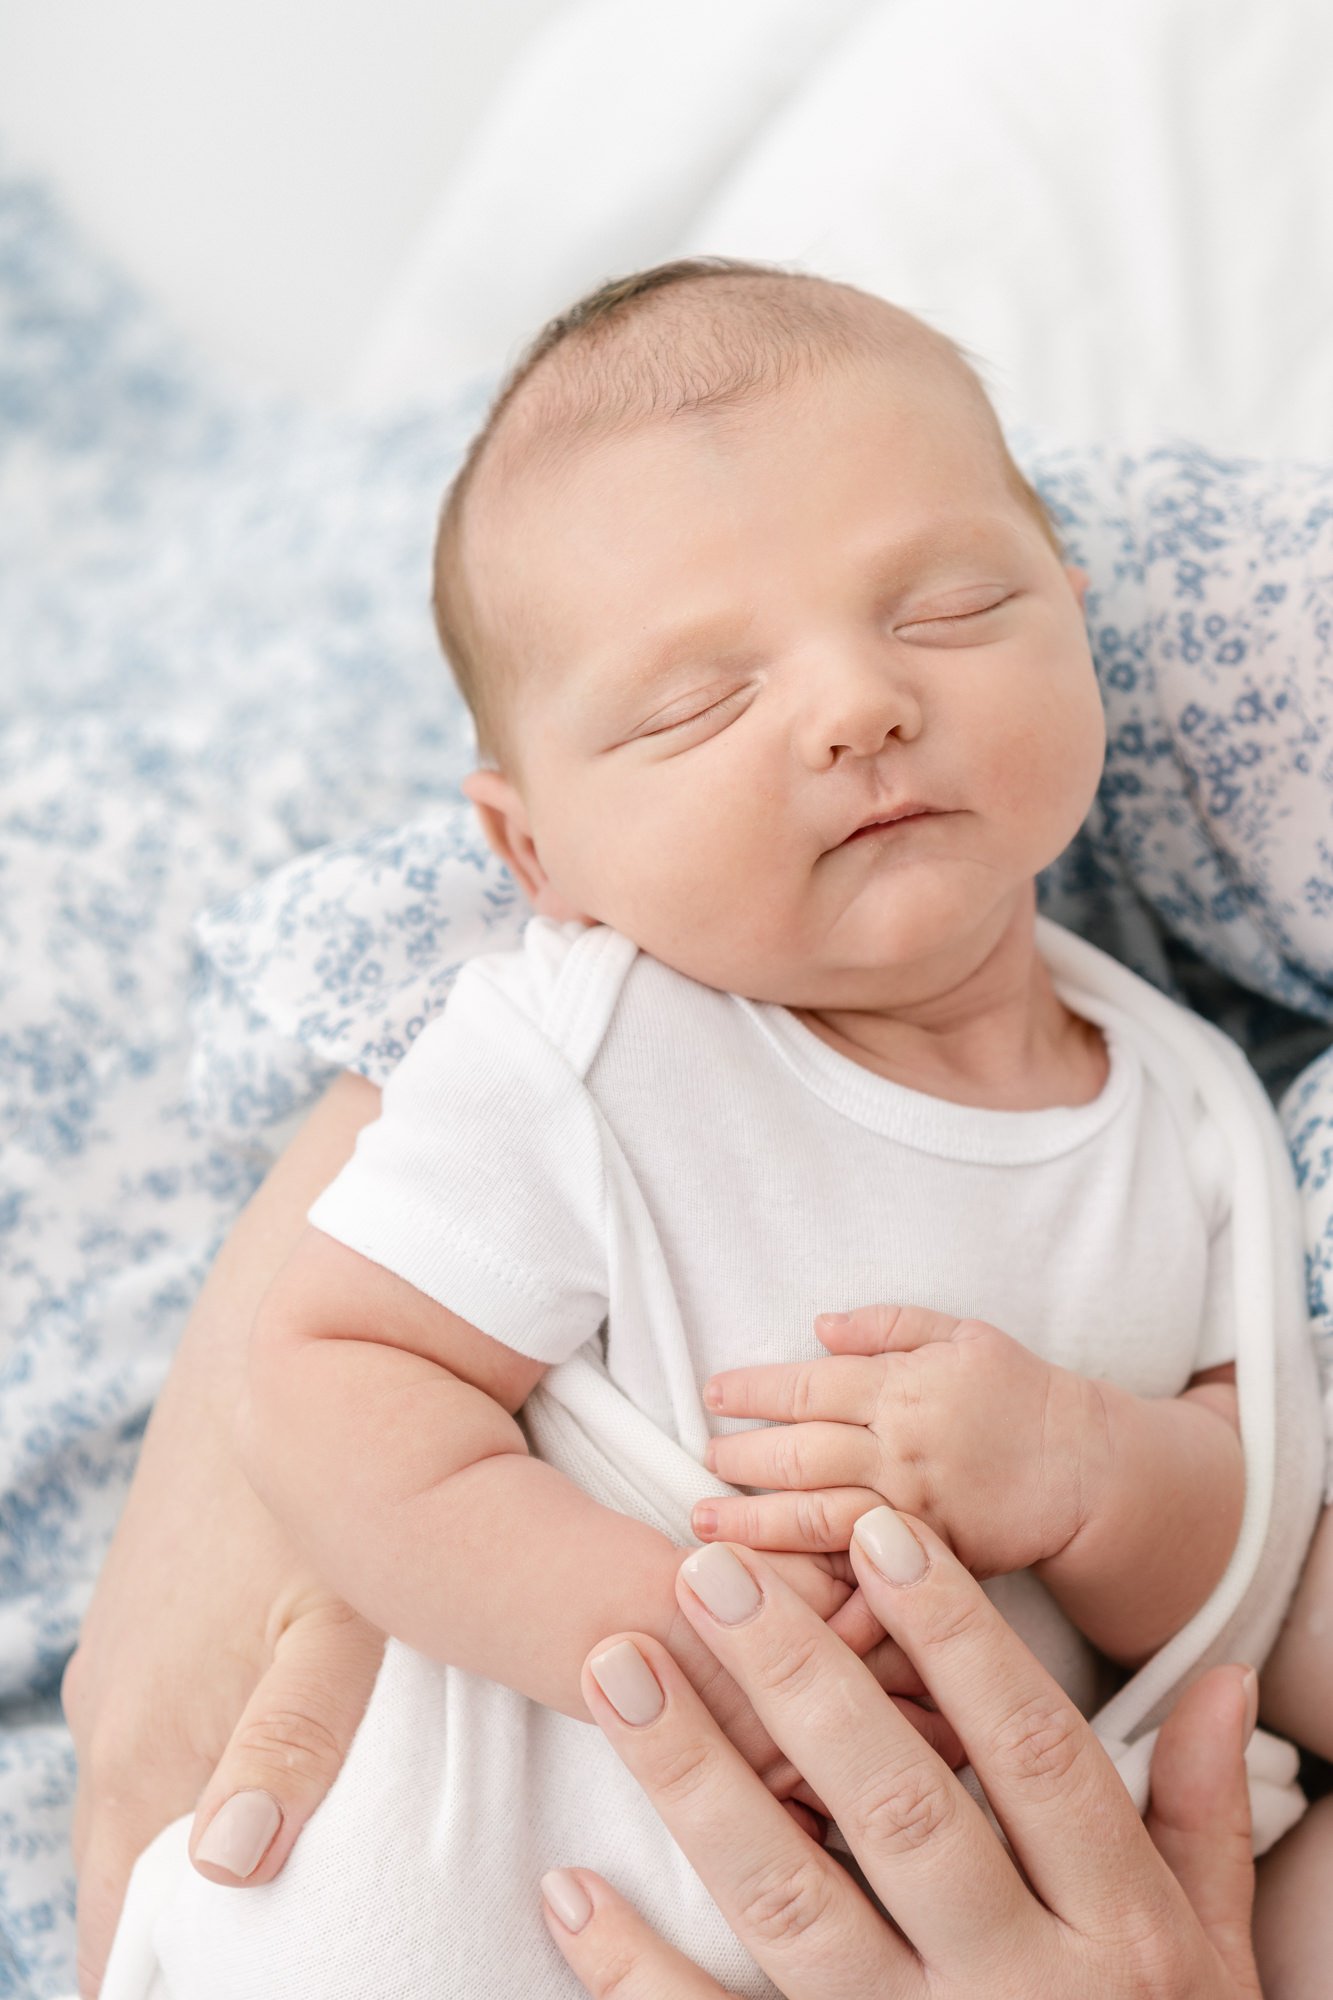    Sleeping newborn cradled in mom’s arms rests peacefully. Mom places on hand on baby’s stomach and keeps baby close to her elbow with other arm. Image captured by Nicole Hawkins Photography #newbornportraits #newbornstudioshoots #NewJerseyPhotograp